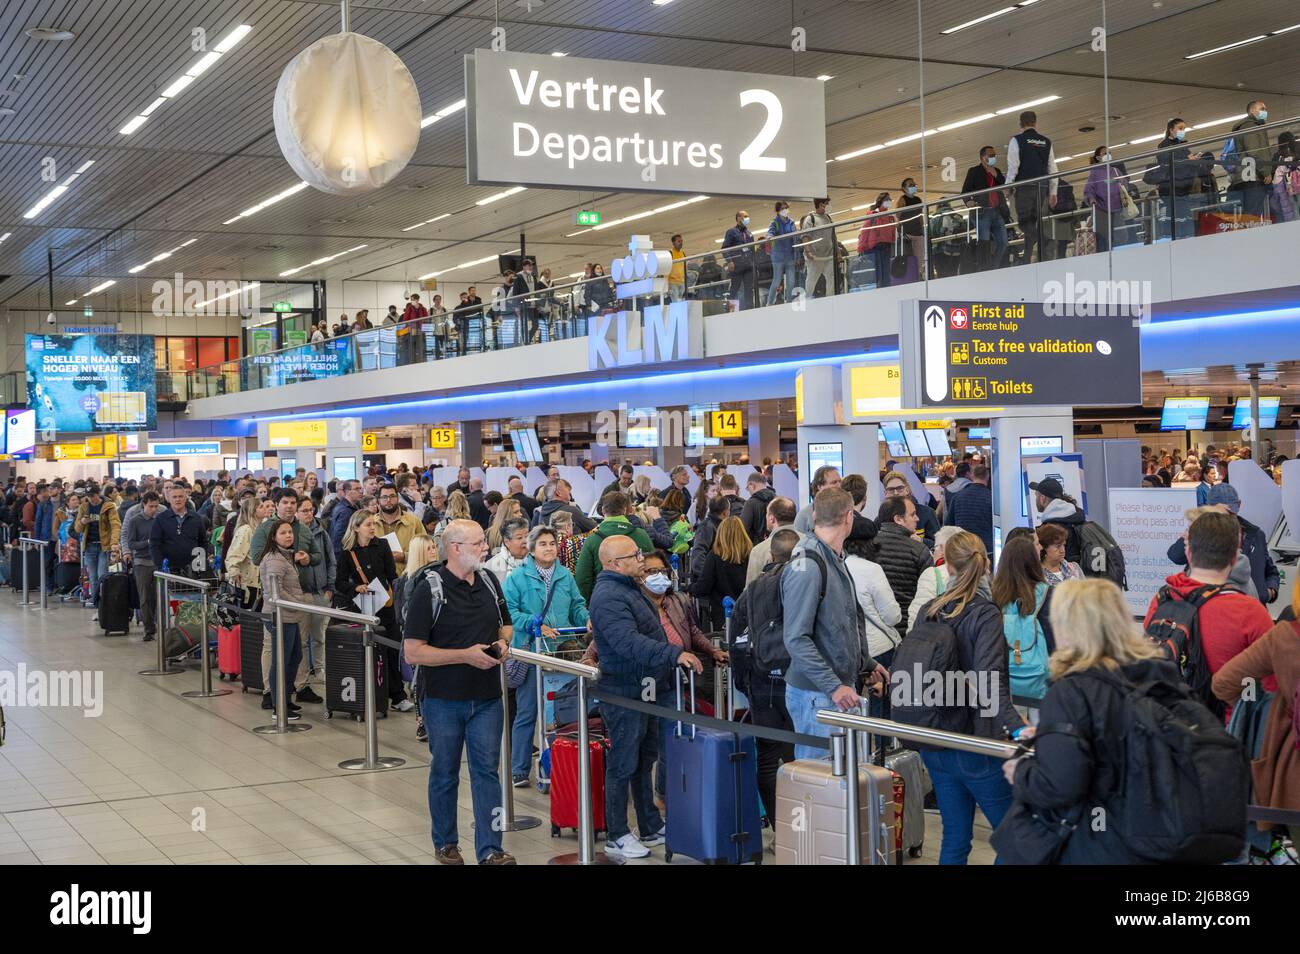 Schiphol, Netherlands. 30th Apr, 2022. 2022-04-30 06:47:35 SCHIPHOL - Schiphol Airport is very busy this weekend. The airport is facing serious staff shortages because there are hundreds of vacancies at the check-in desks, security and in the baggage basement that cannot be filled. ANP EVERT ELZINGA netherlands out - belgium out Credit: ANP/Alamy Live News Stock Photo